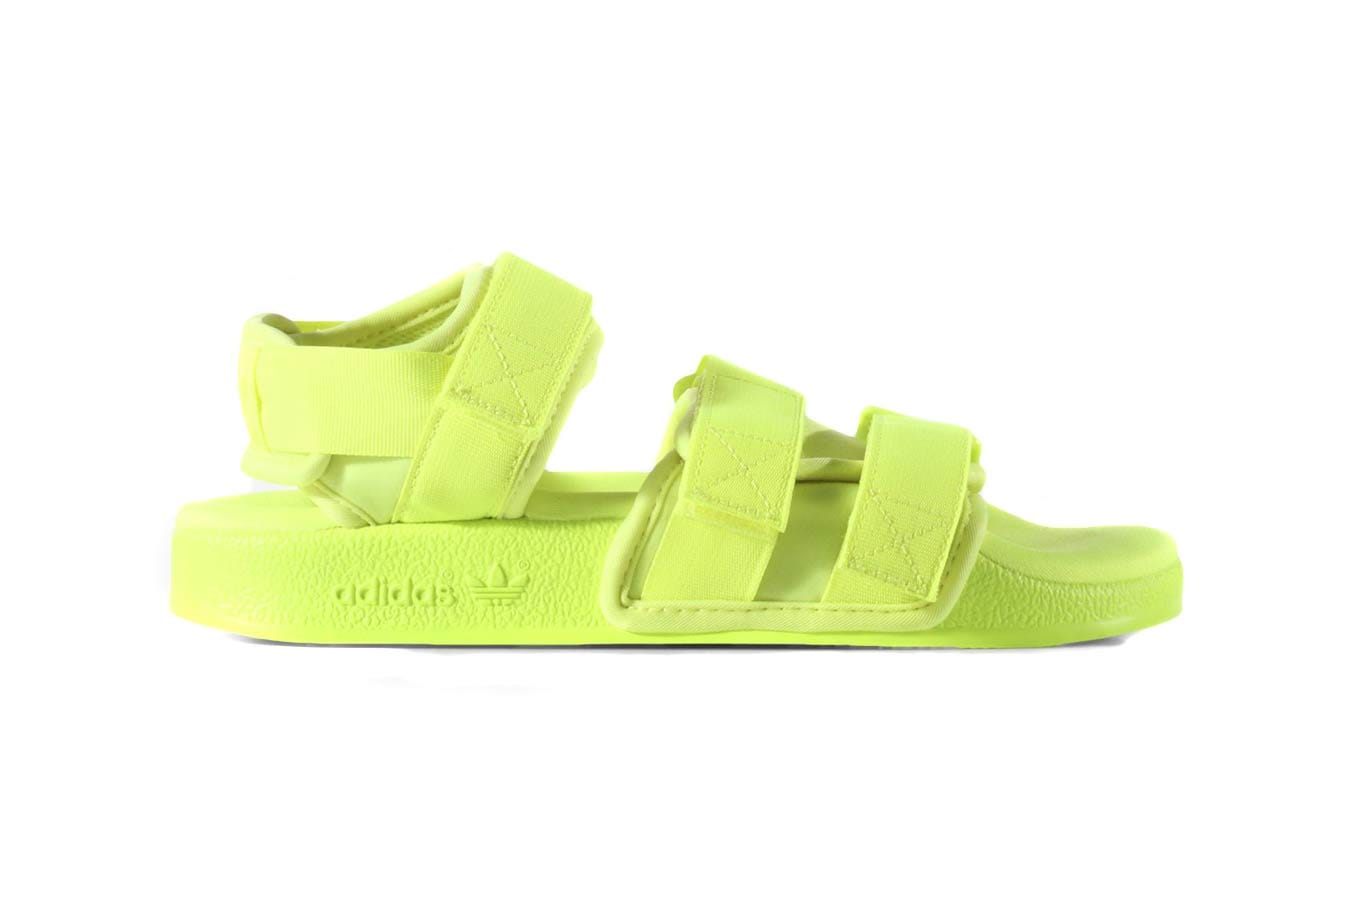 adidas' Adilette Sandals in Yellow and 